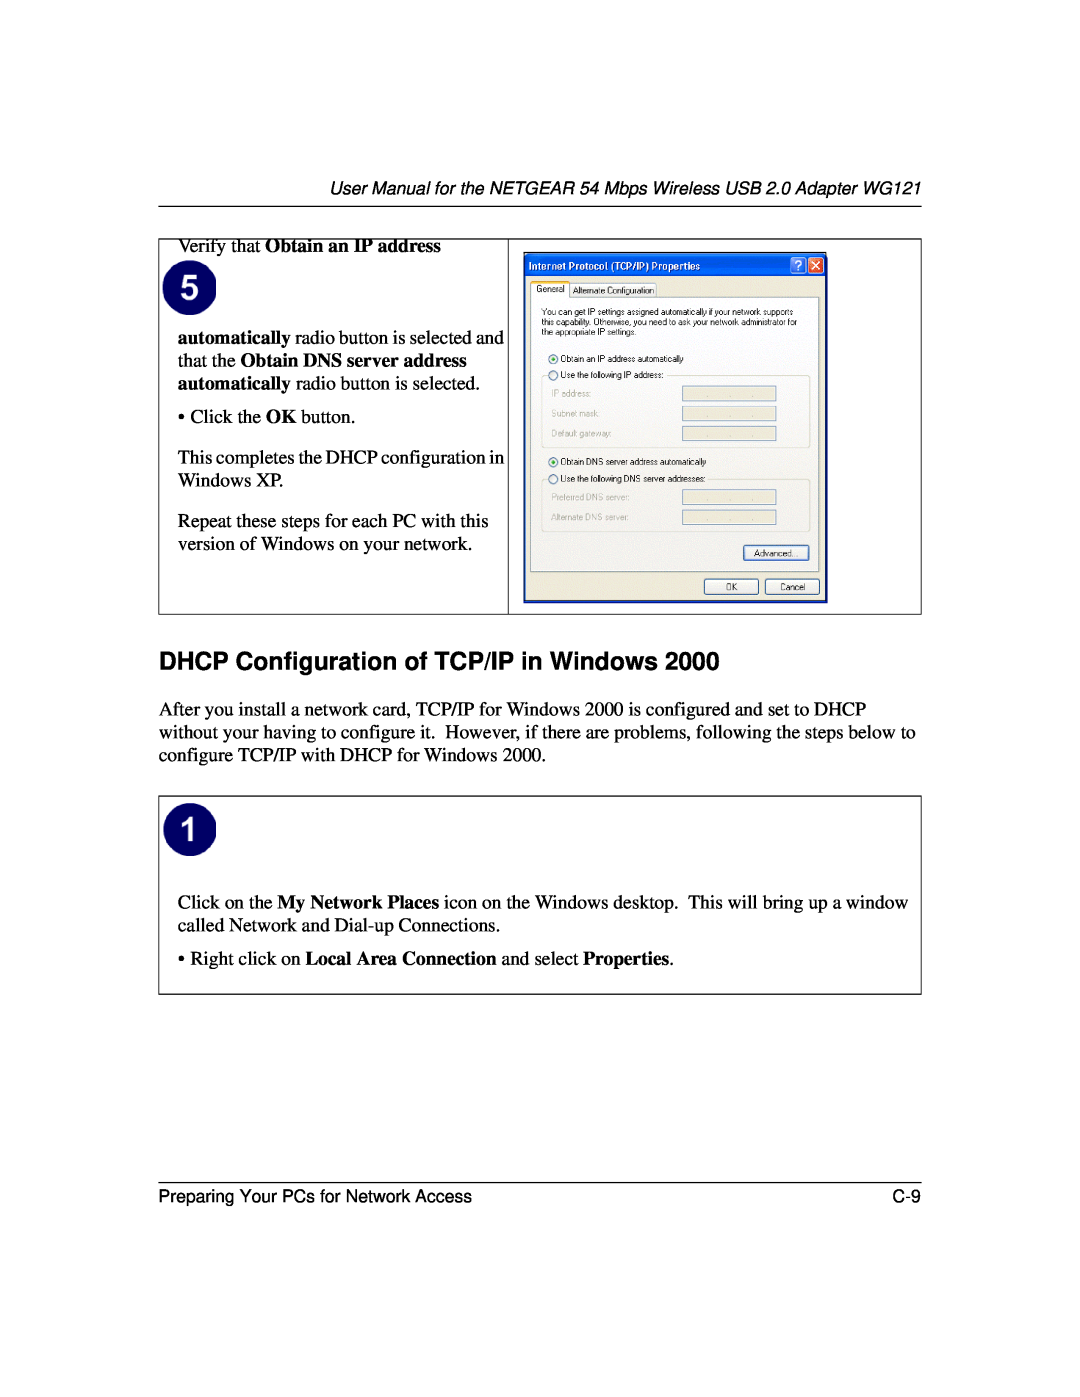 NETGEAR WG121 user manual DHCP Configuration of TCP/IP in Windows, Verify that Obtain an IP address 